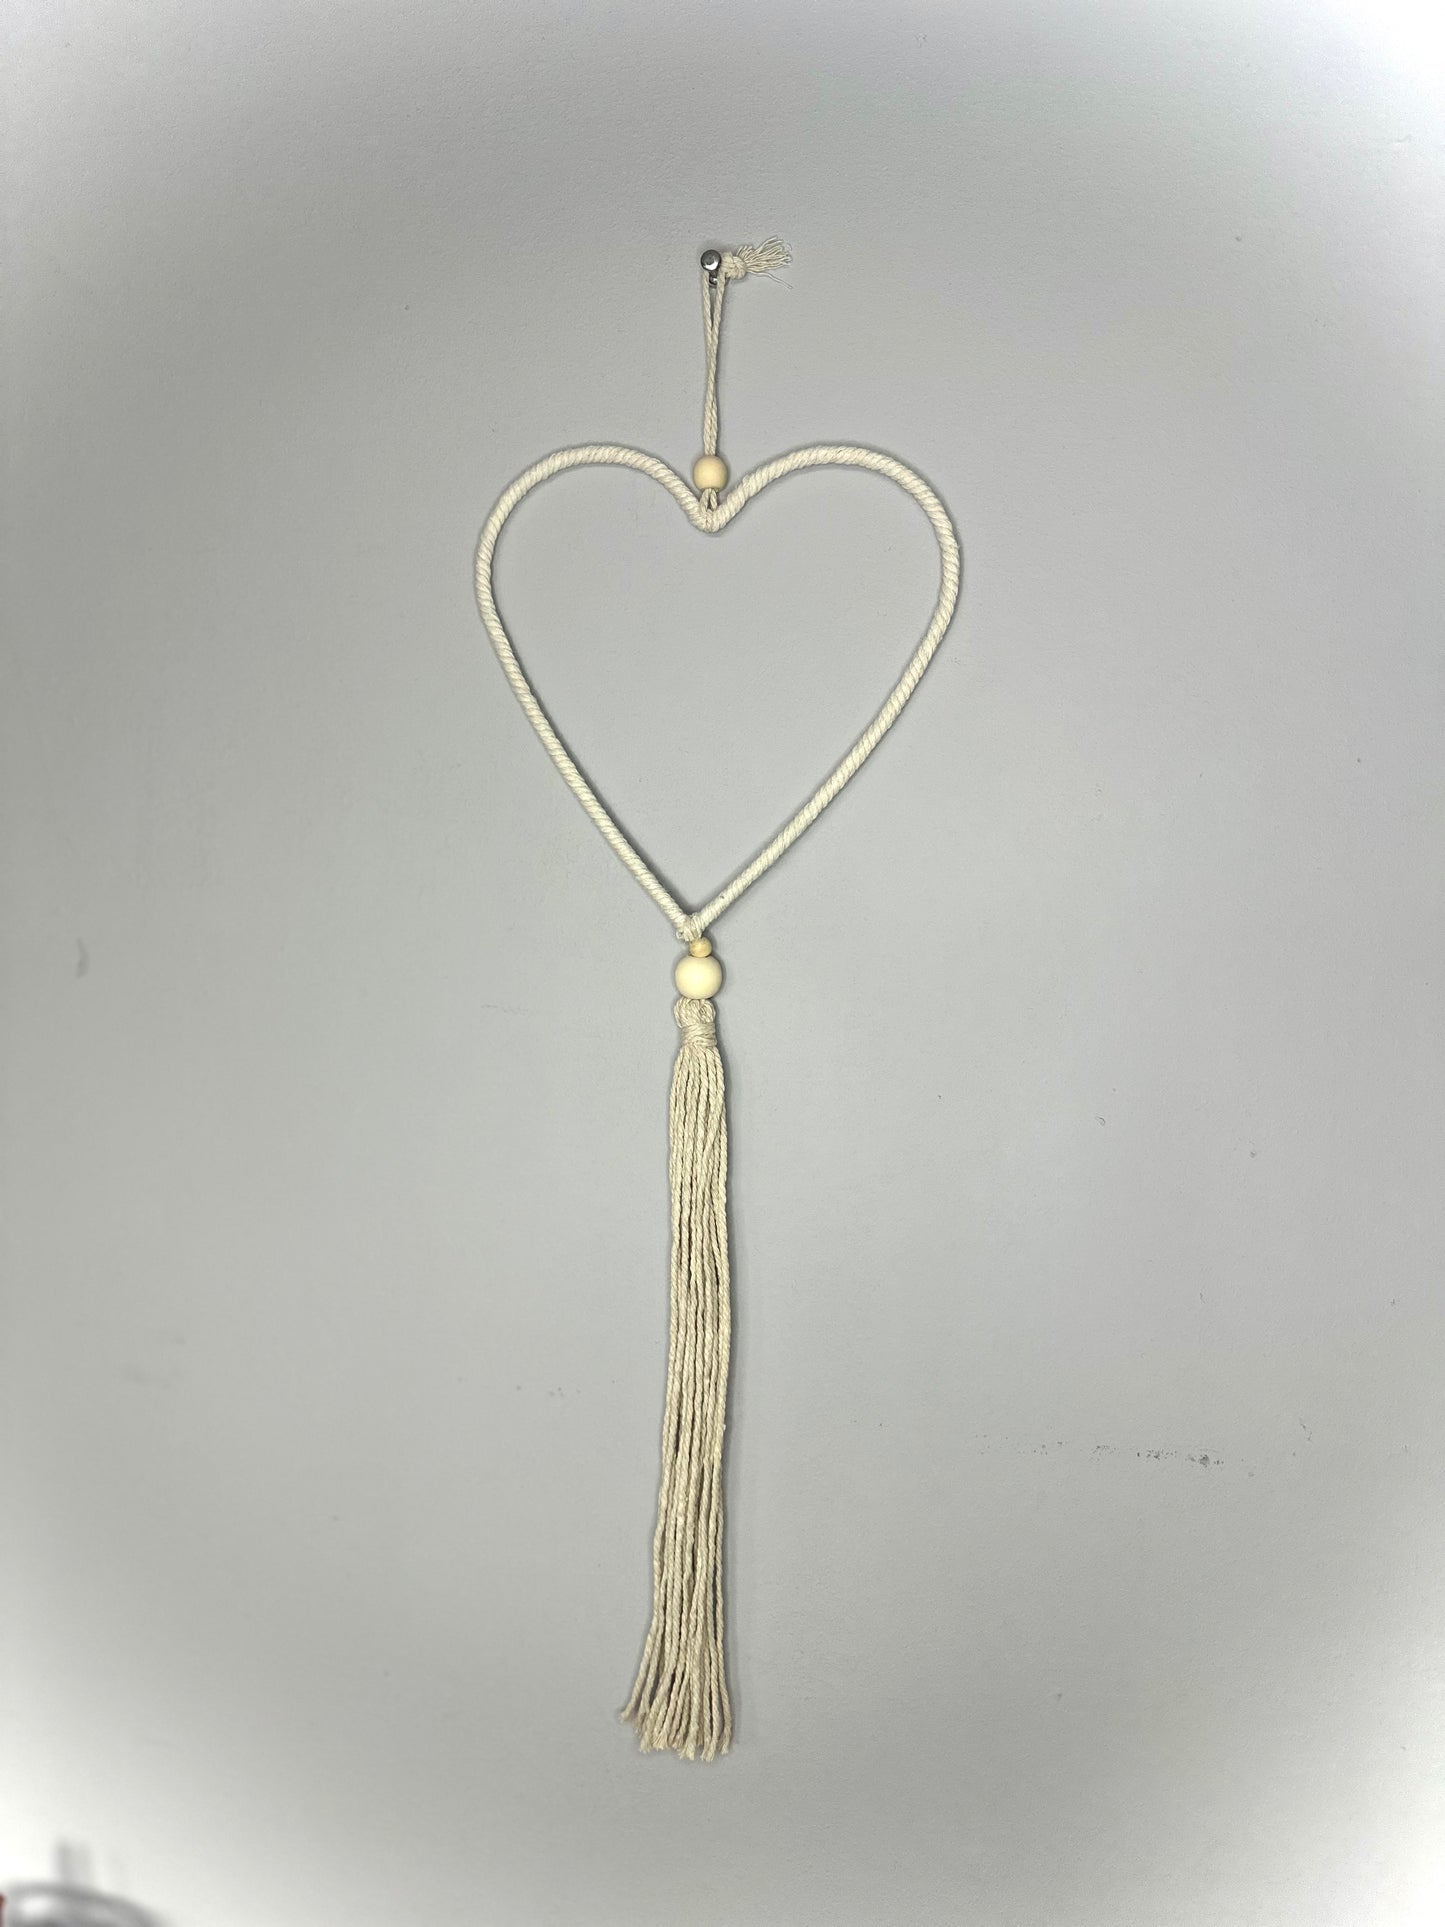 Macrame Hanging Heart For Wall Decor Cream Neutral Accessories